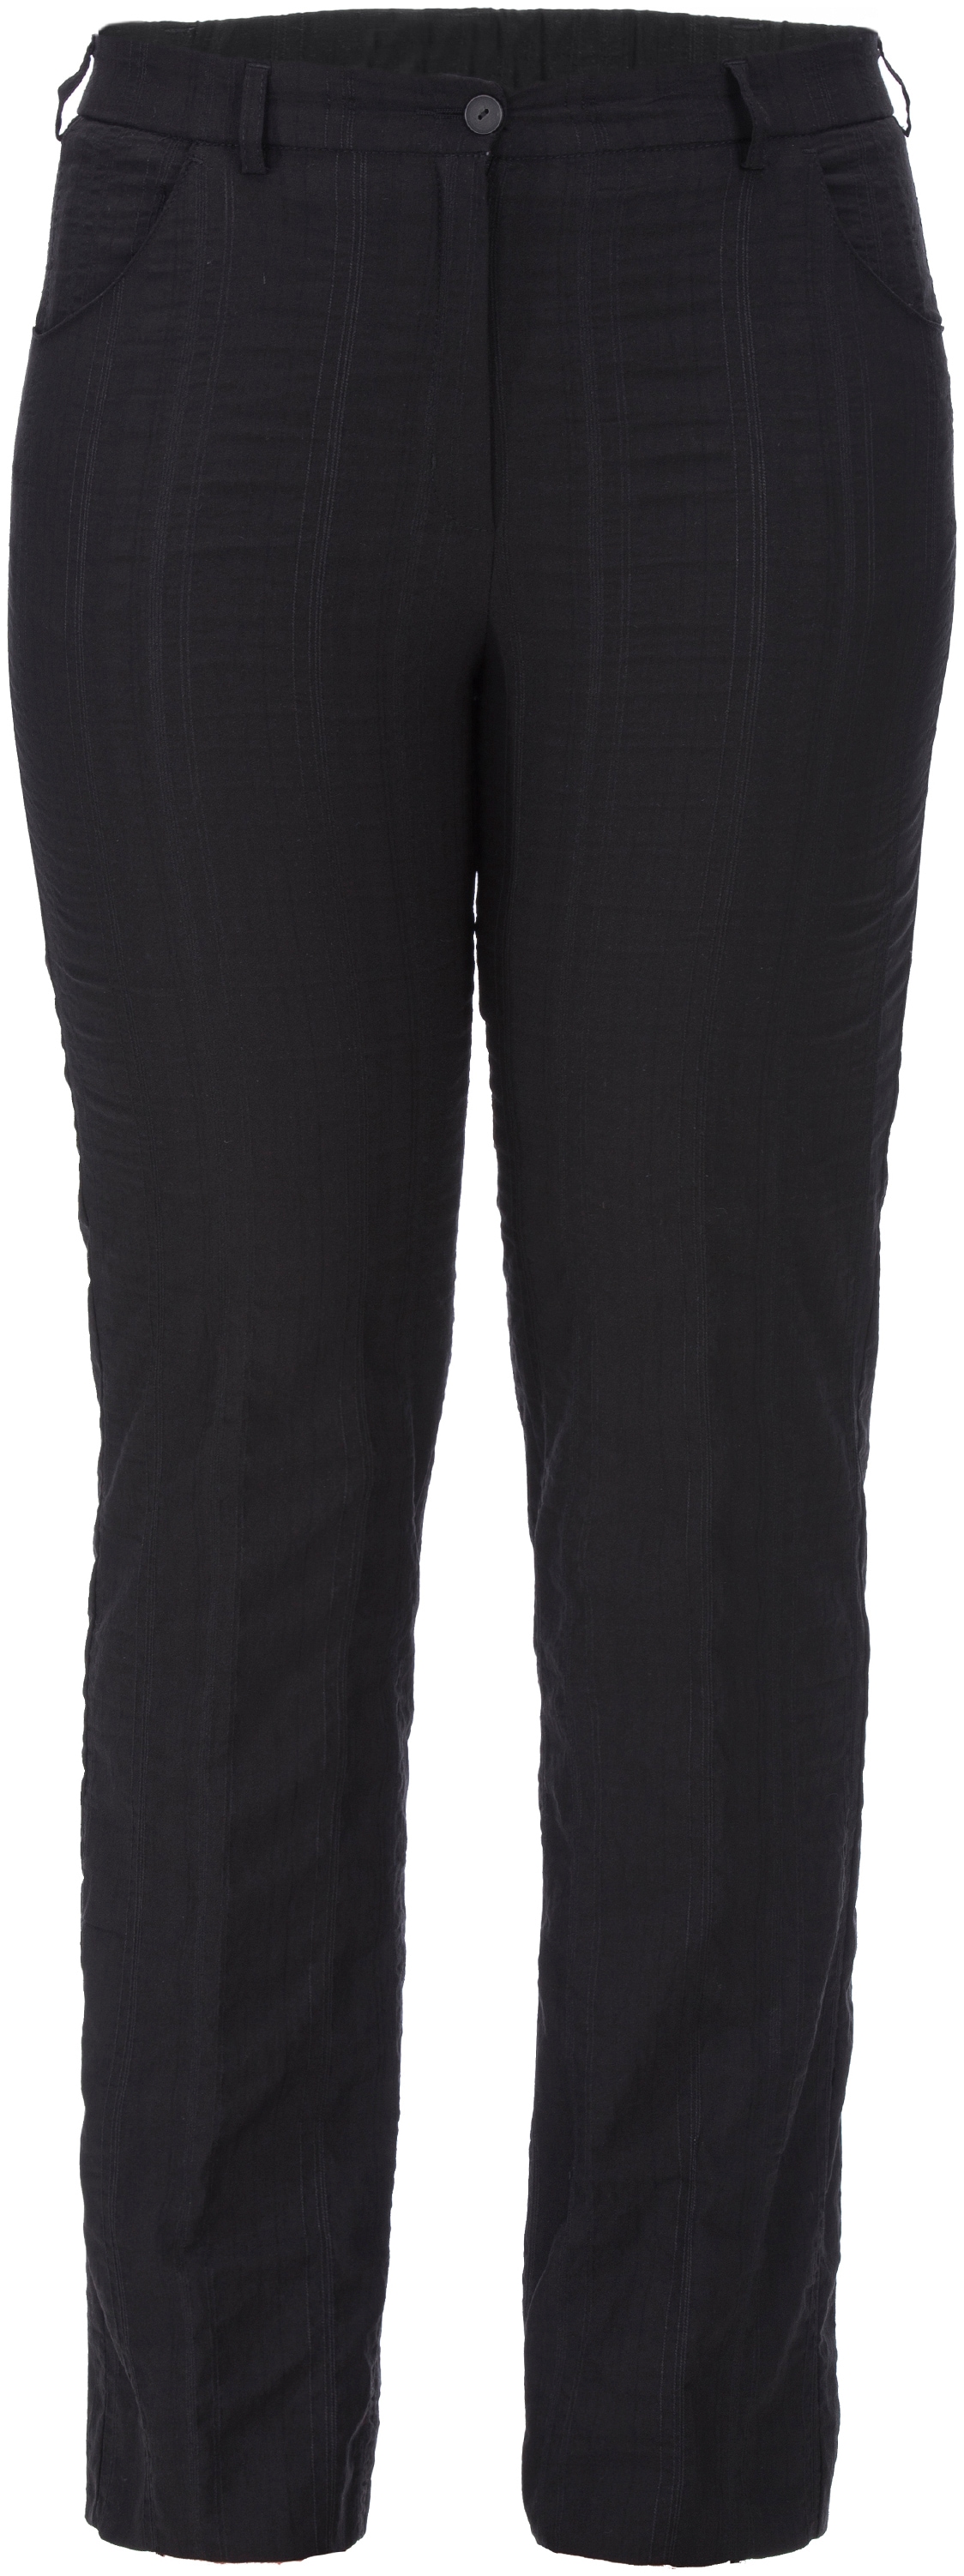 KjBRAND Stoffhose »Bea«, optimale in Passform Quer-Stretch ♕ bei